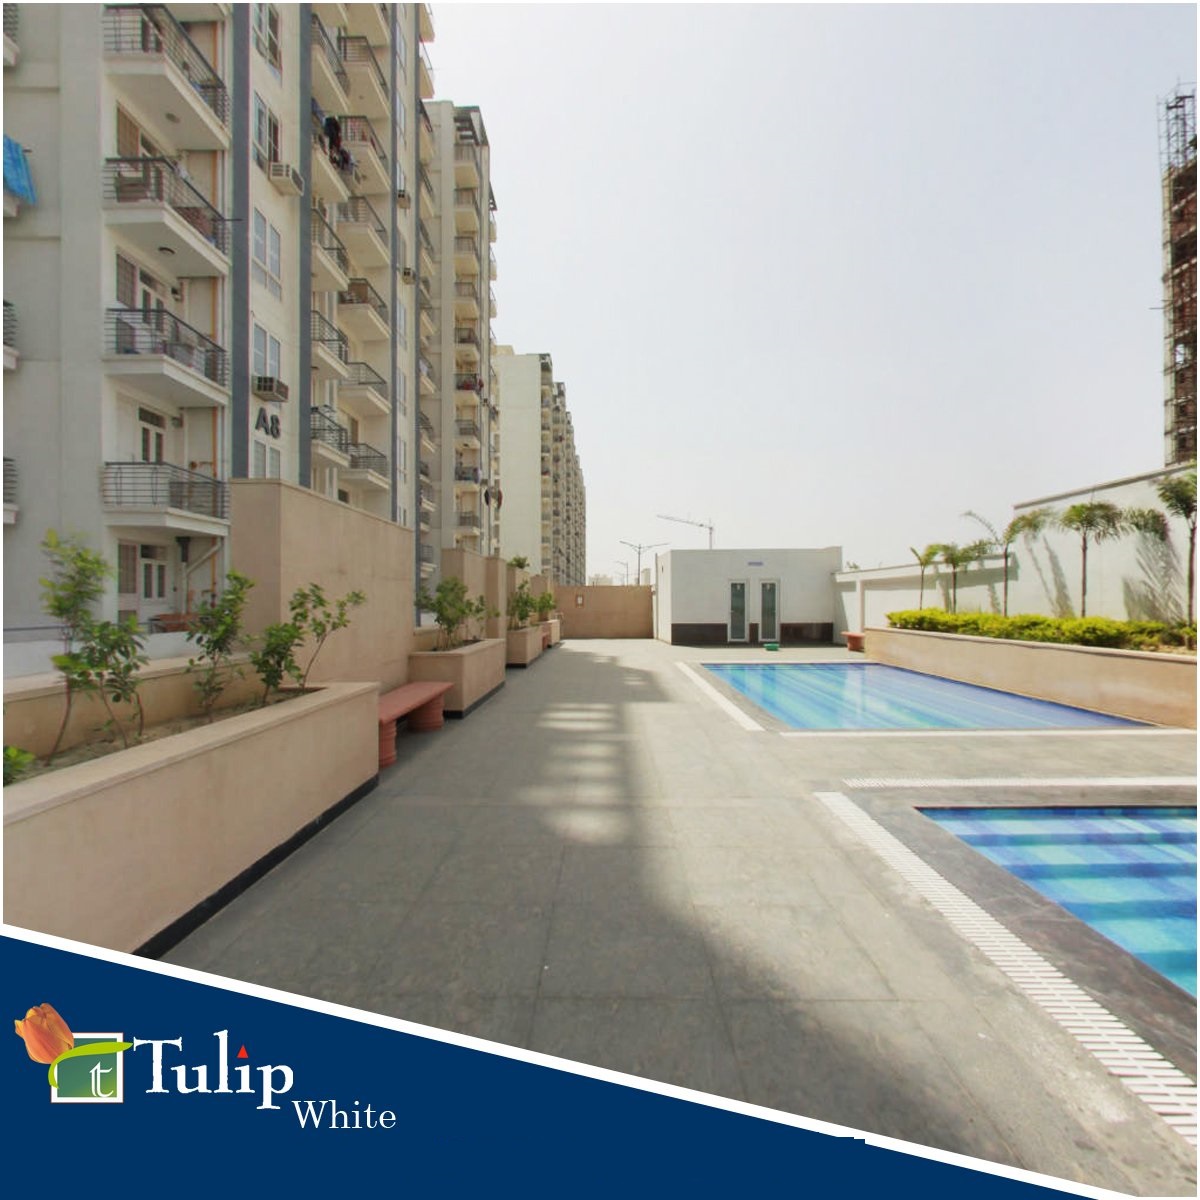 Avail 3 bhk apartments at Tulip White in Sector 69, Gurgaon